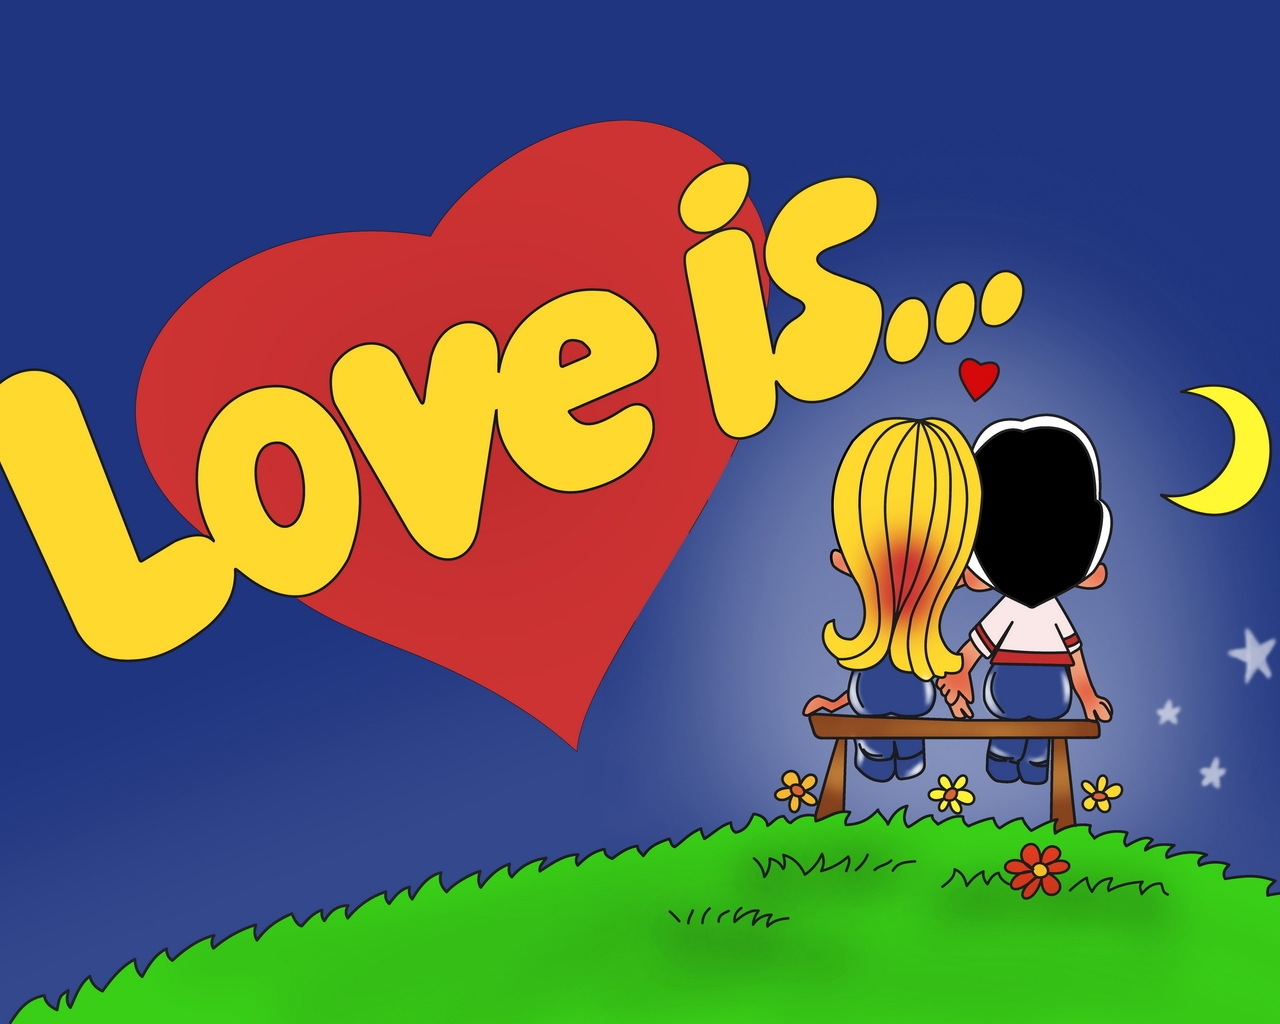 Love is for 1280 x 1024 resolution